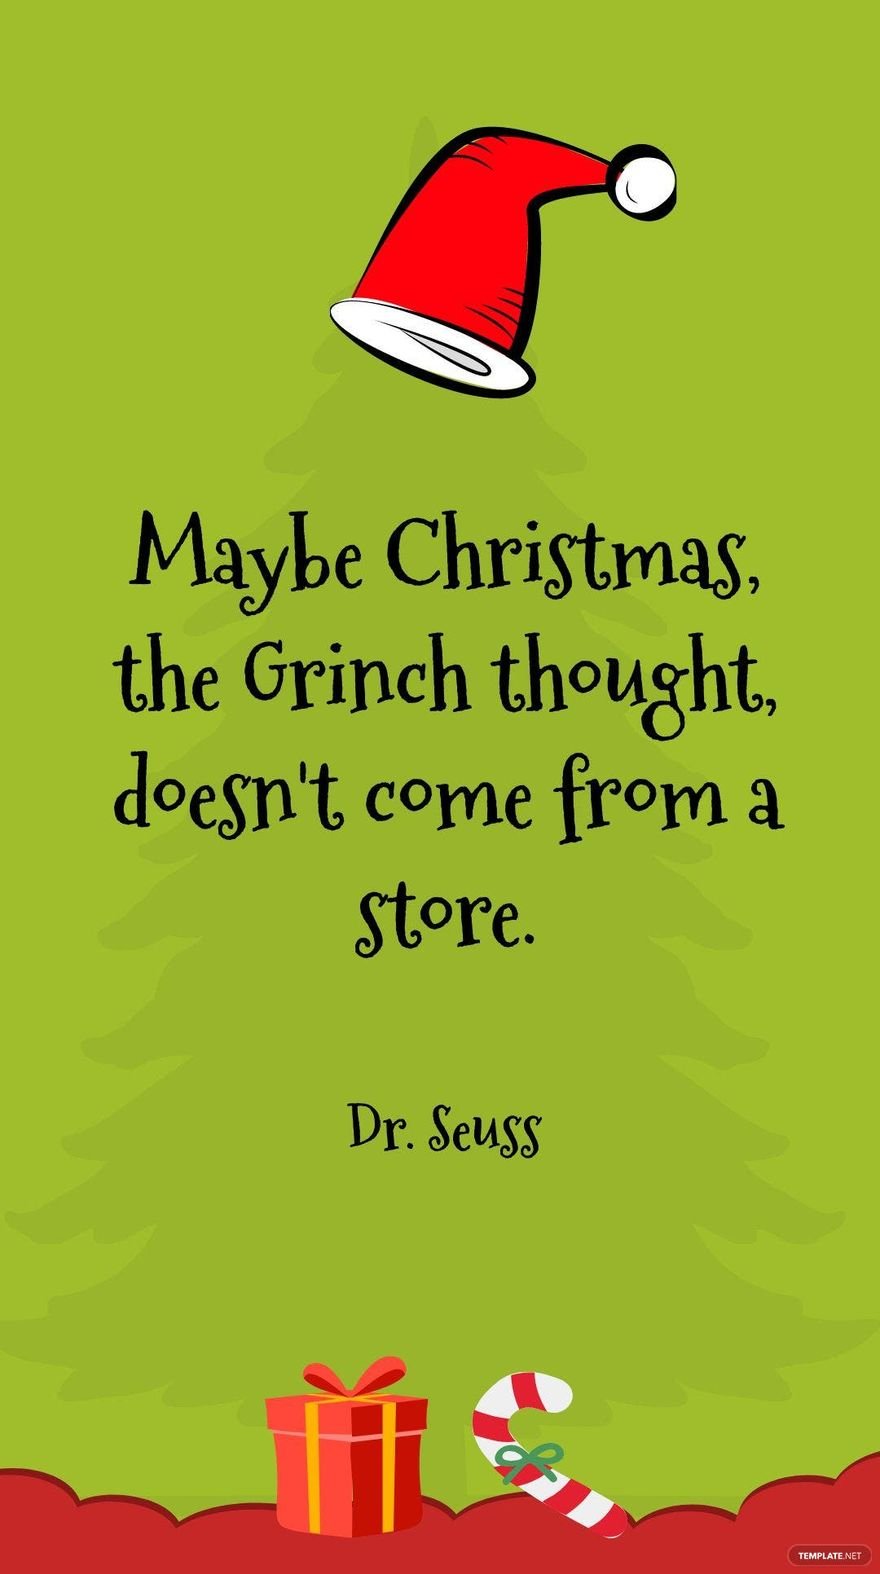 Free Dr. Seuss - Maybe Christmas, the Grinch thought, doesn't come from a store. in JPG